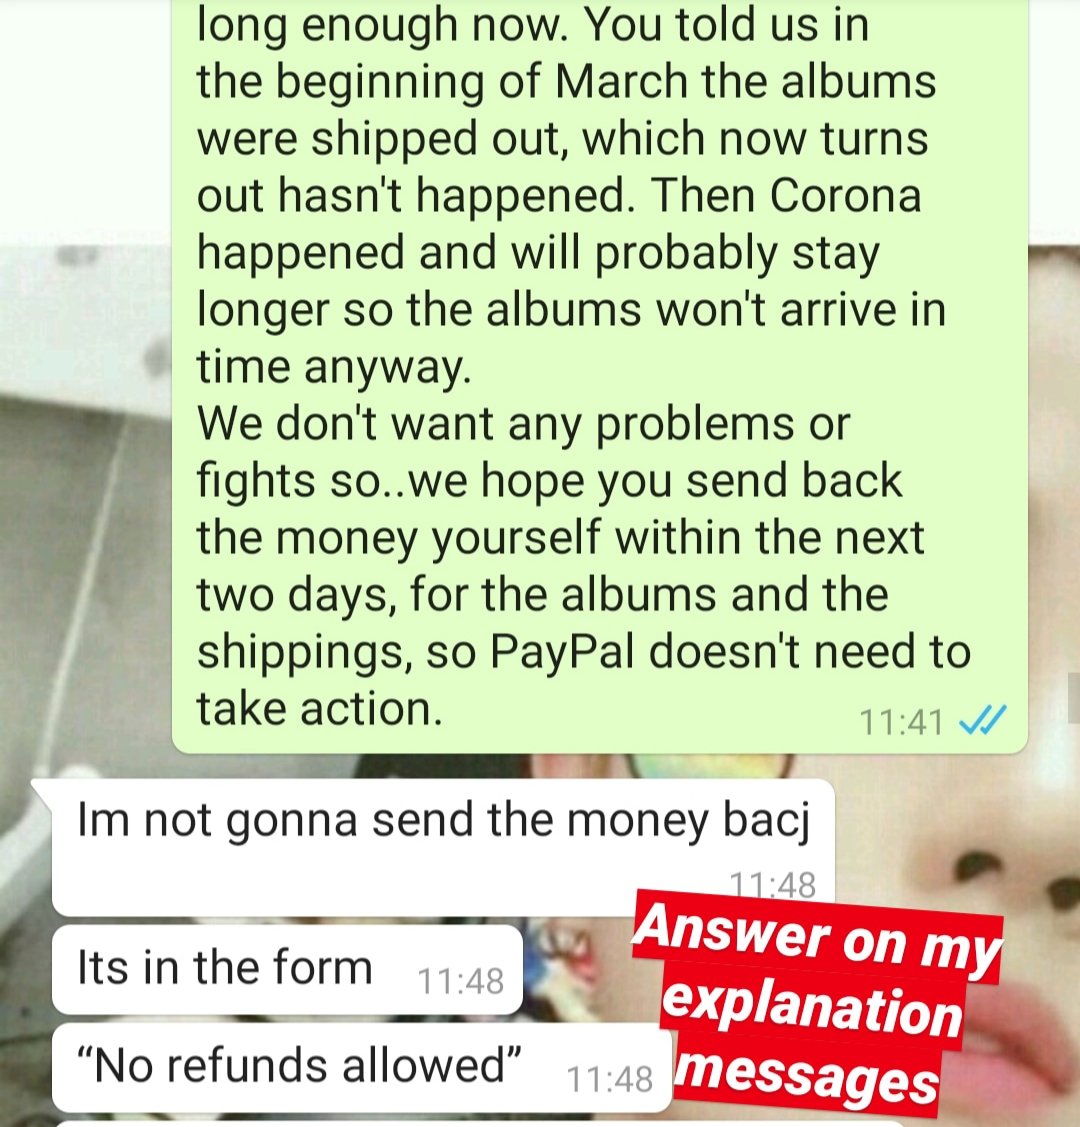 She didn't seem to understand we don't accuse her of not sending out our albums at this situation with Corona, which we weren't. The real problem was, that she lied to us regarding the shipping status and not informing us about the tracking number we paid for.